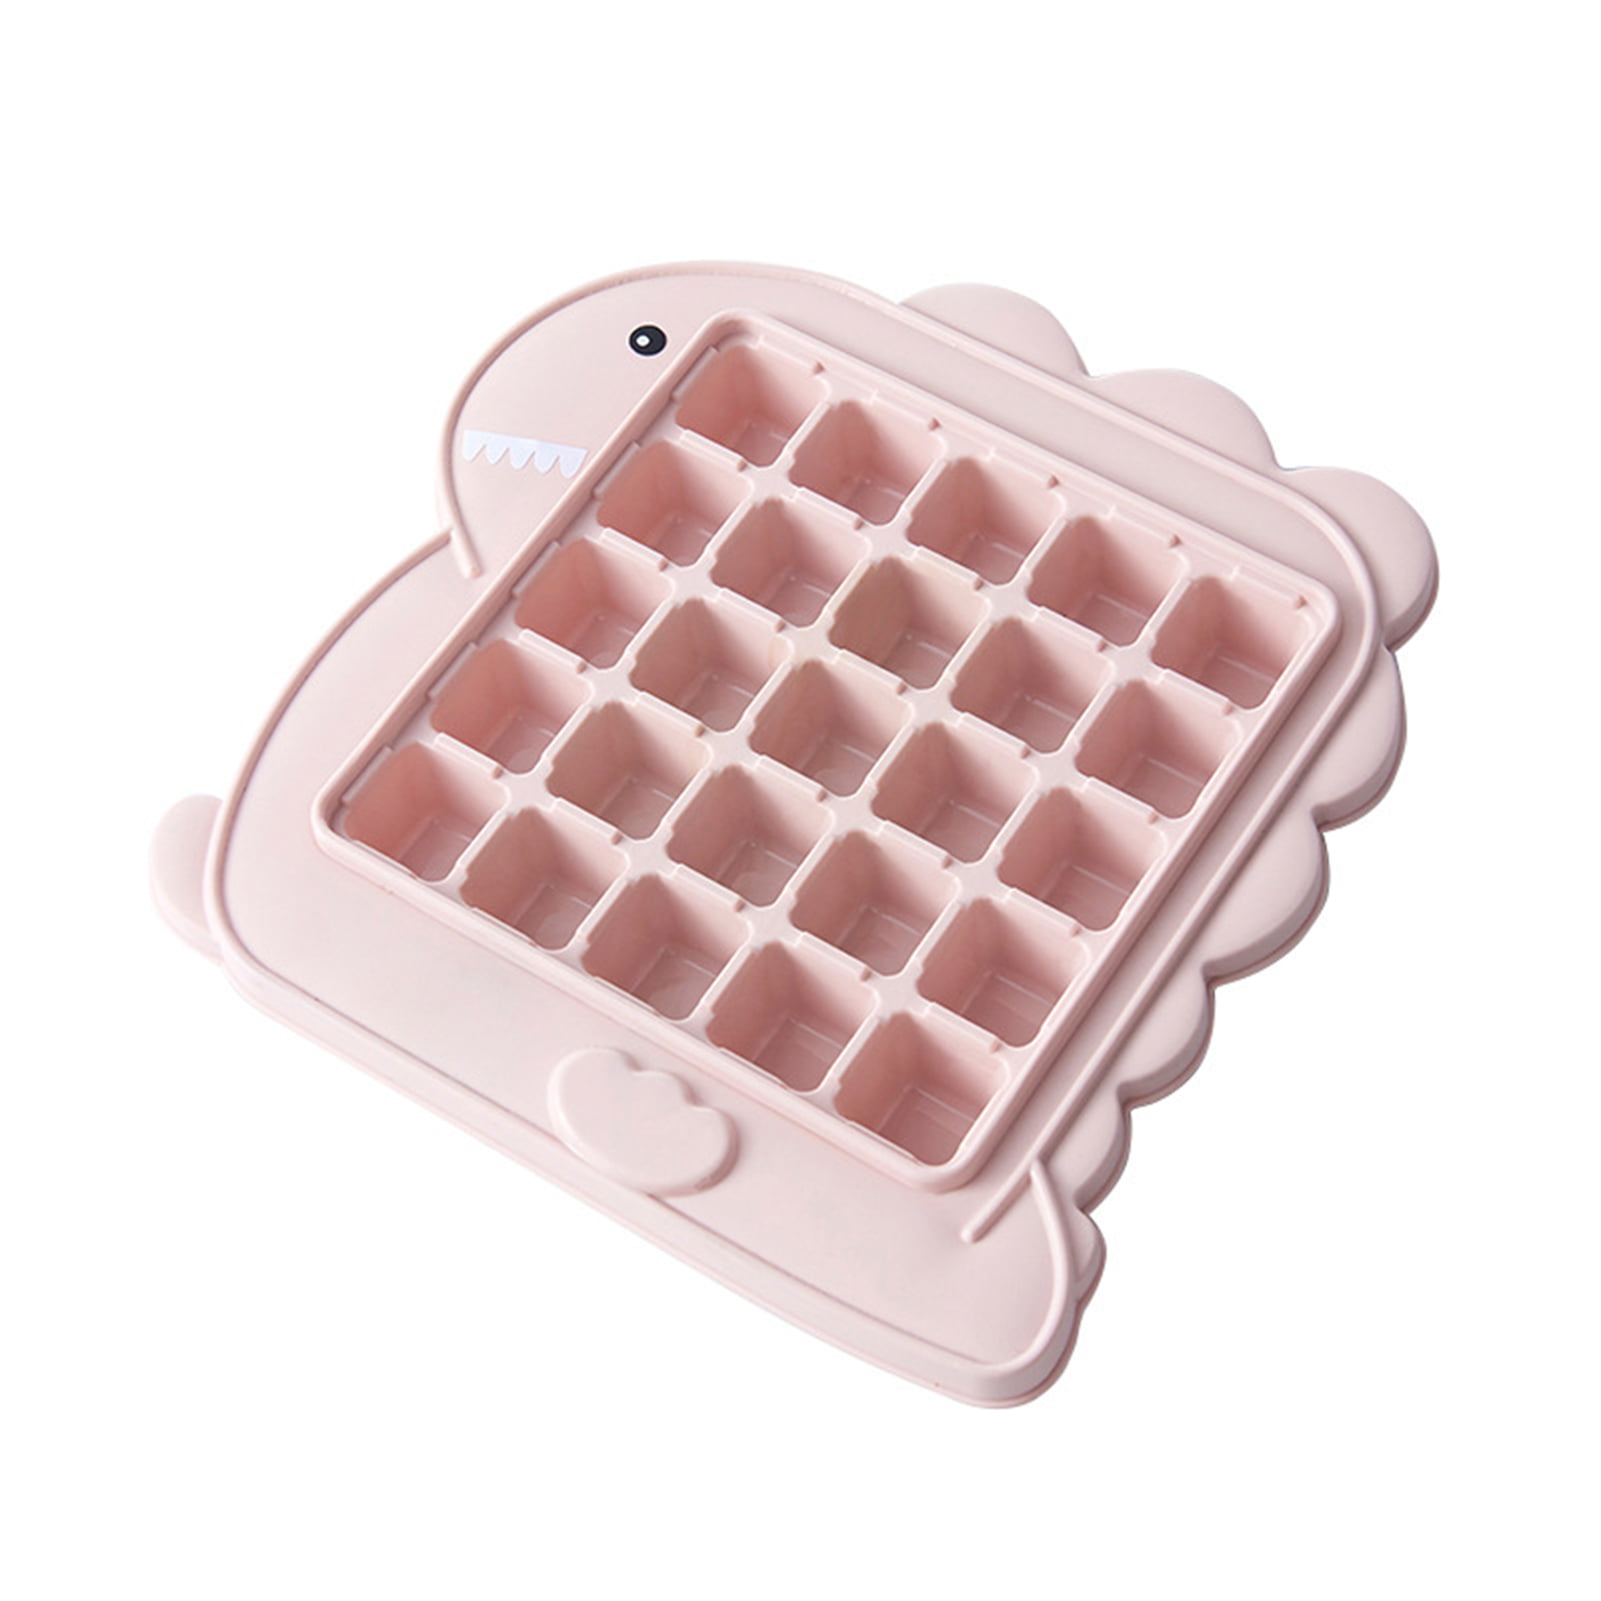 Cube Ice Tray Chocolate Molds Silicone Mold Cartoon Animal Candy Mould 